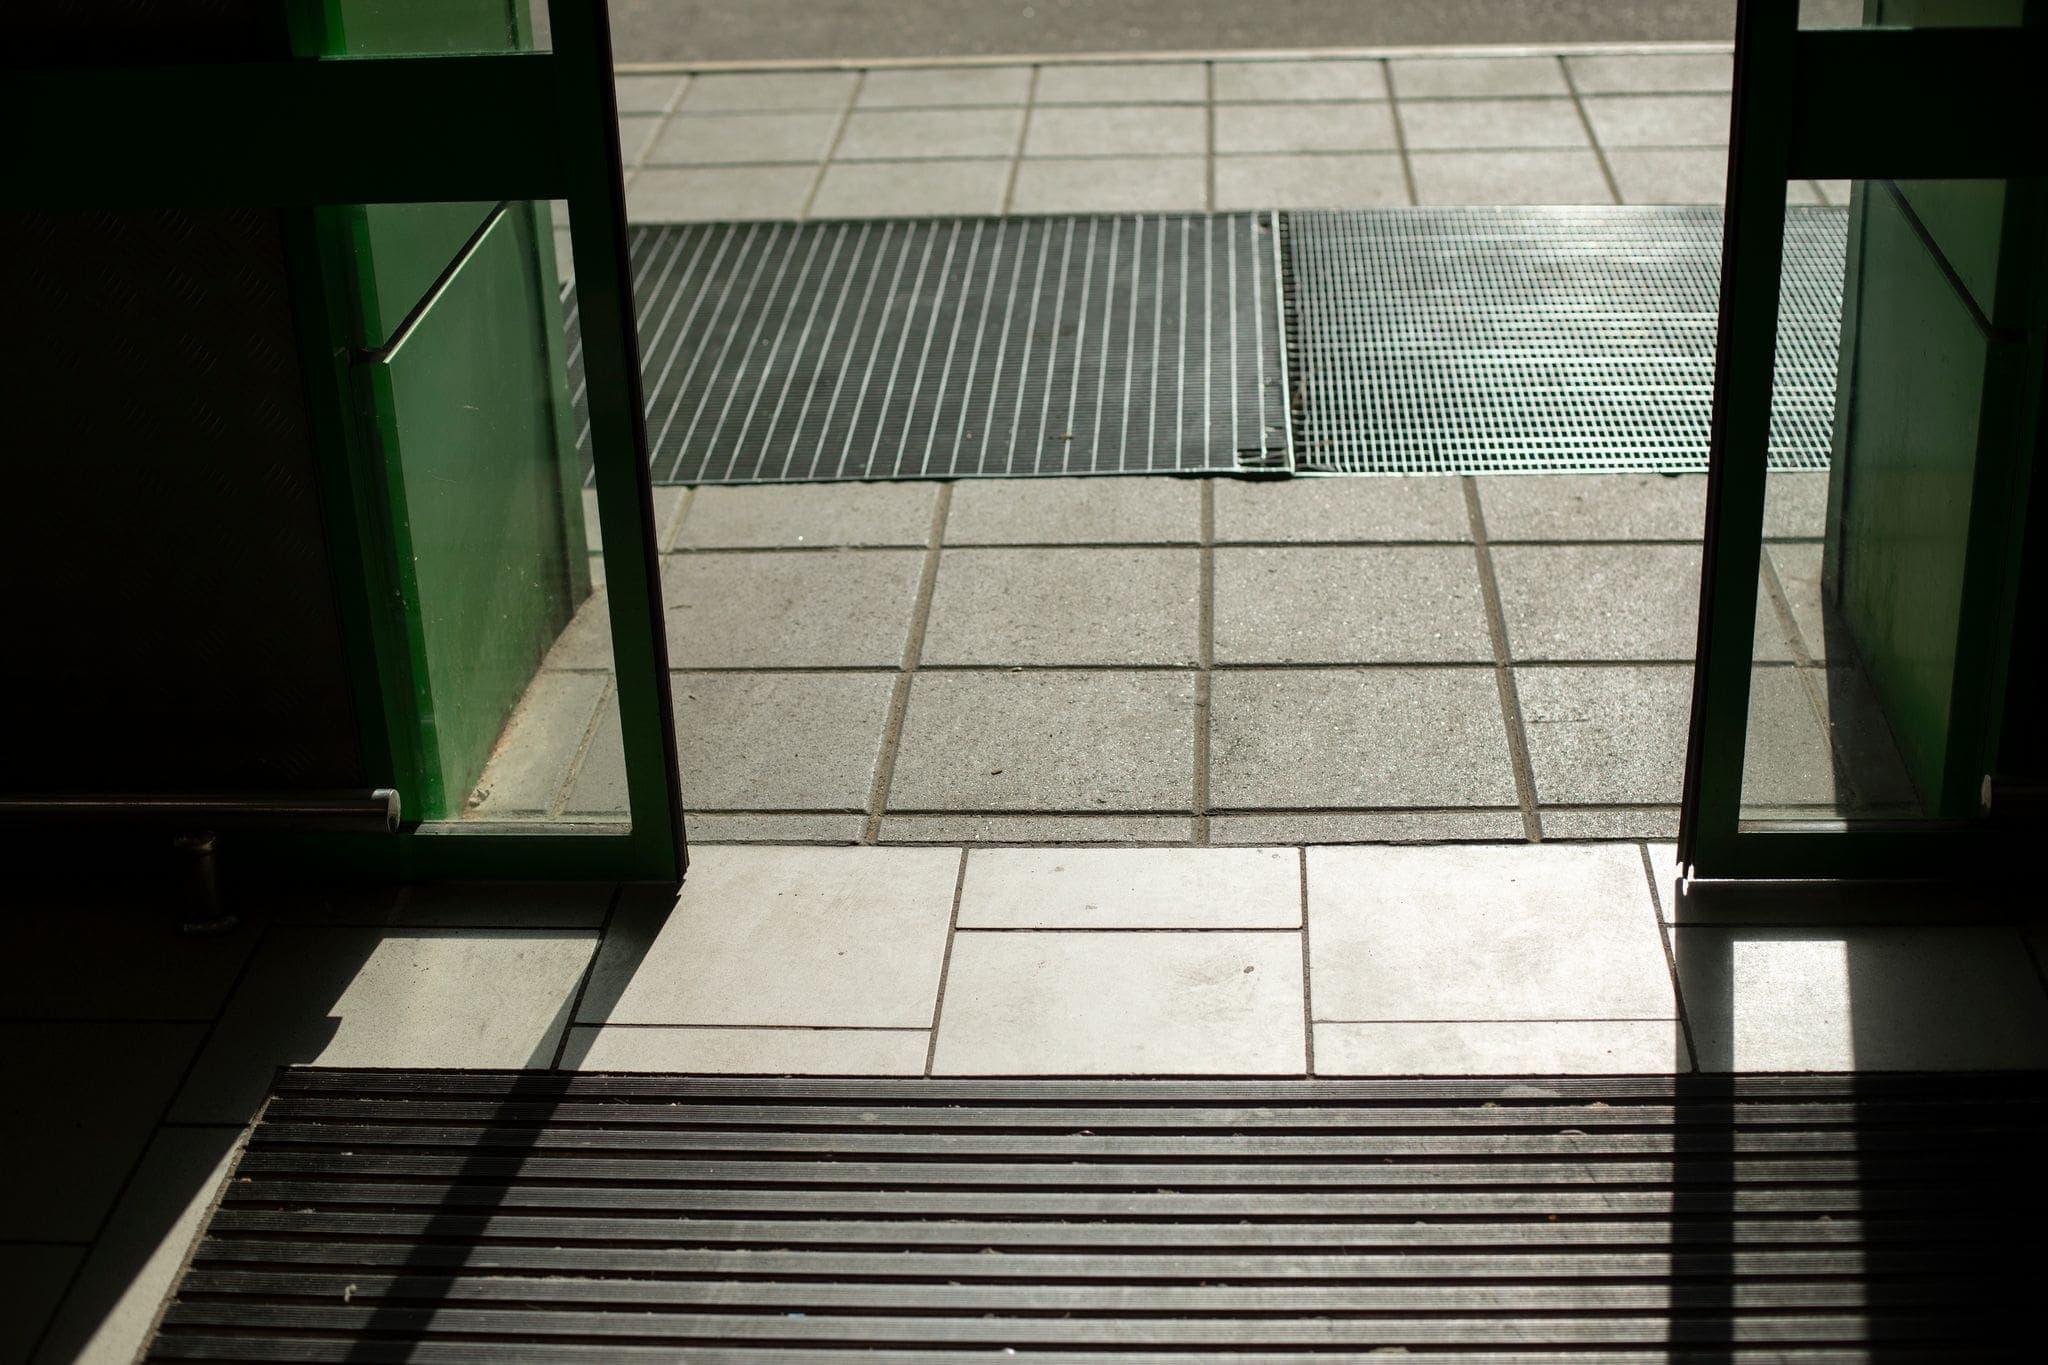 automatic glass sliding doors opening on to a sidewalk